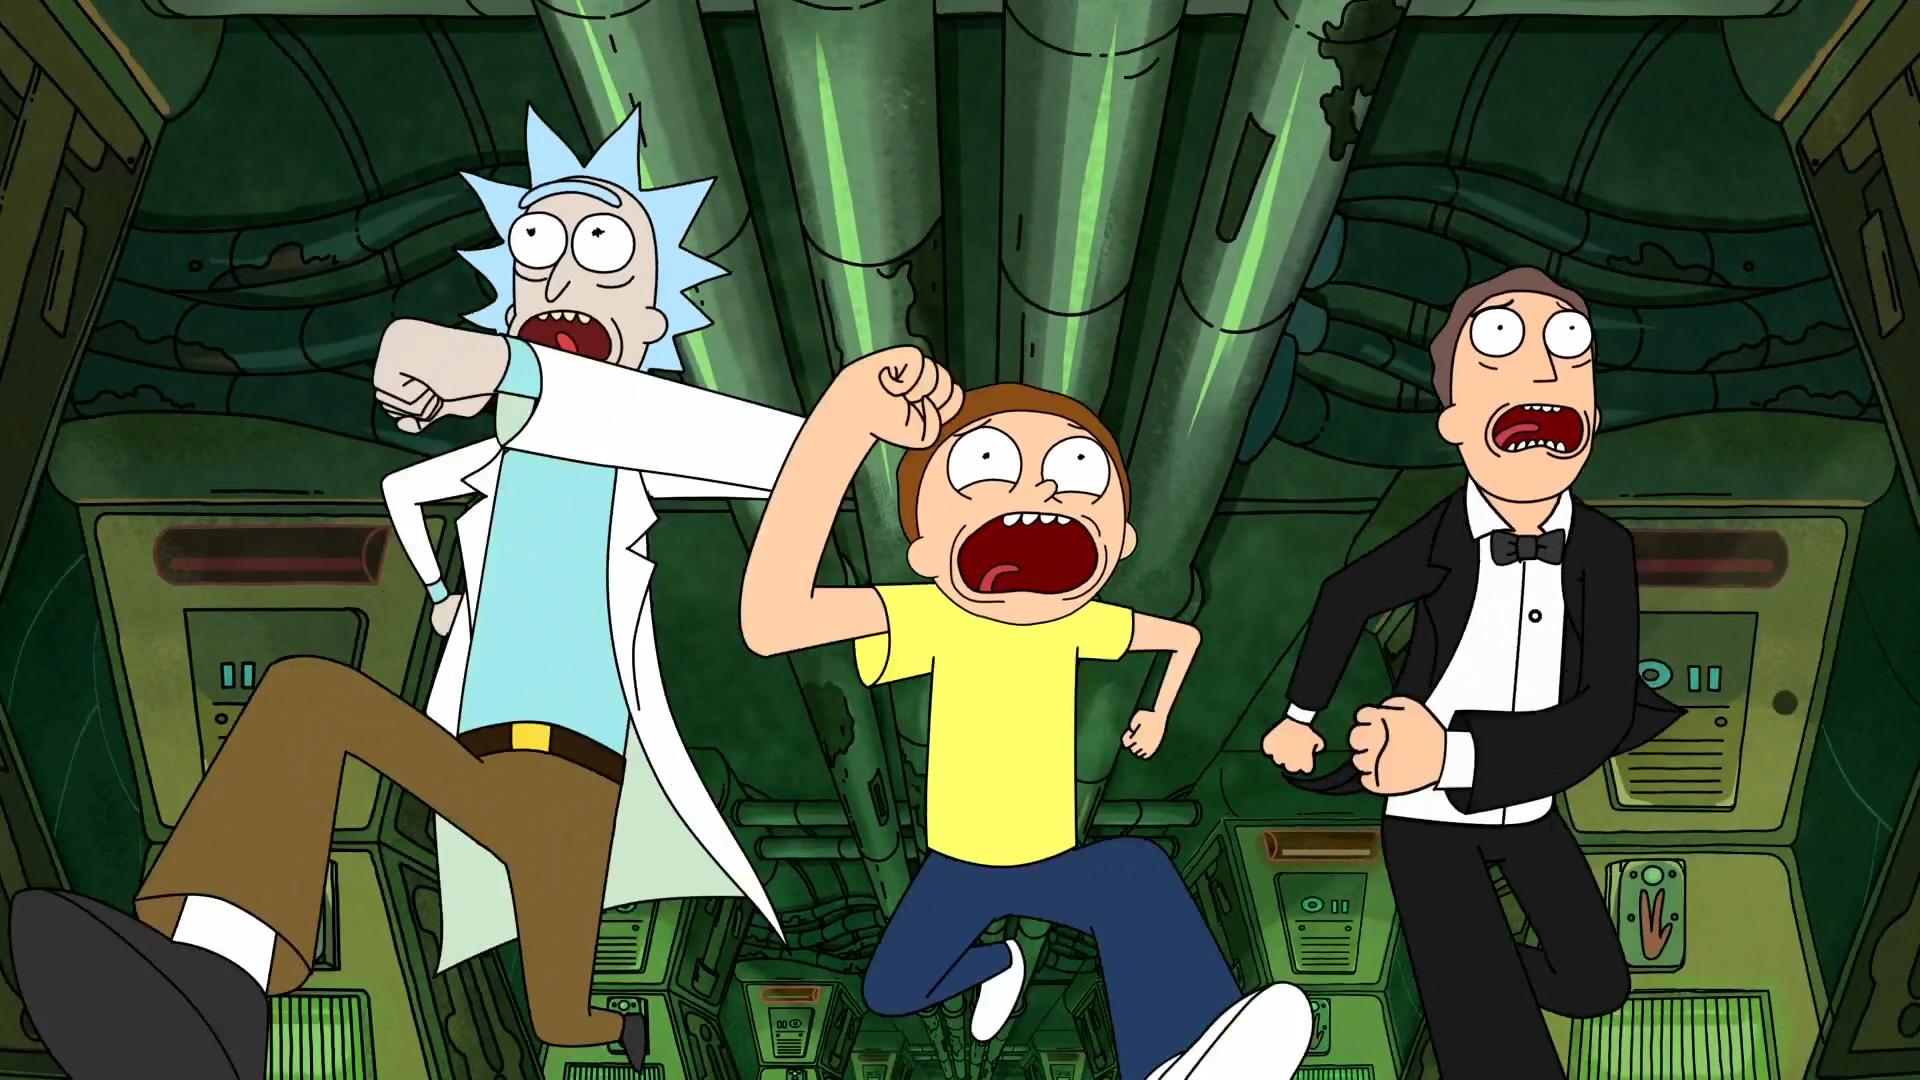 rick and morty, tv show, jerry smith, morty smith, rick sanchez